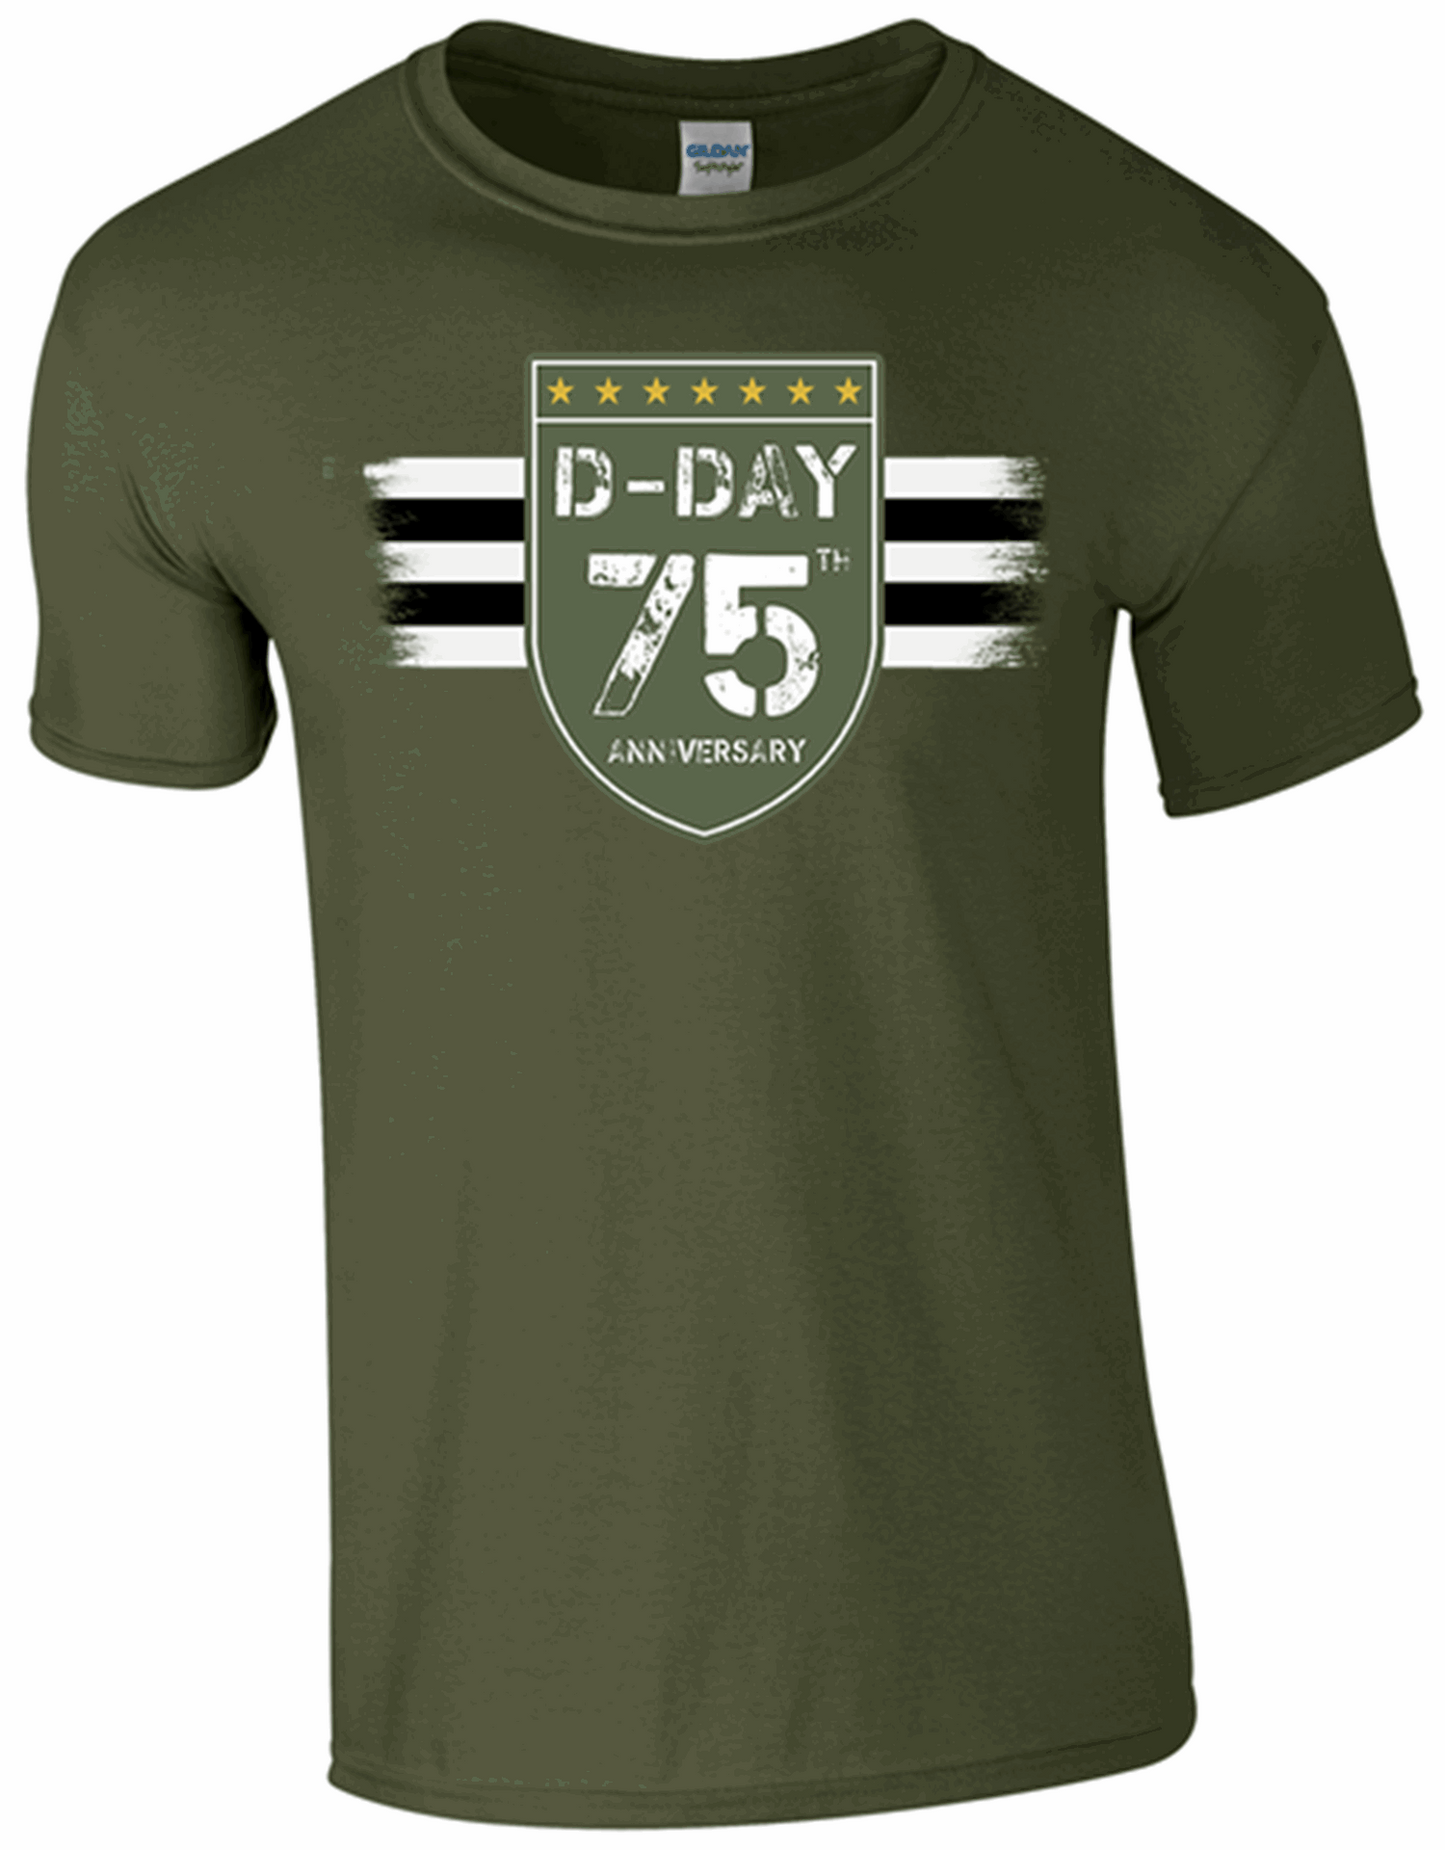 D-Day 75th Anniversary T-Shirt 2 - Army 1157 kit S / Military Green Army 1157 Kit Veterans Owned Business